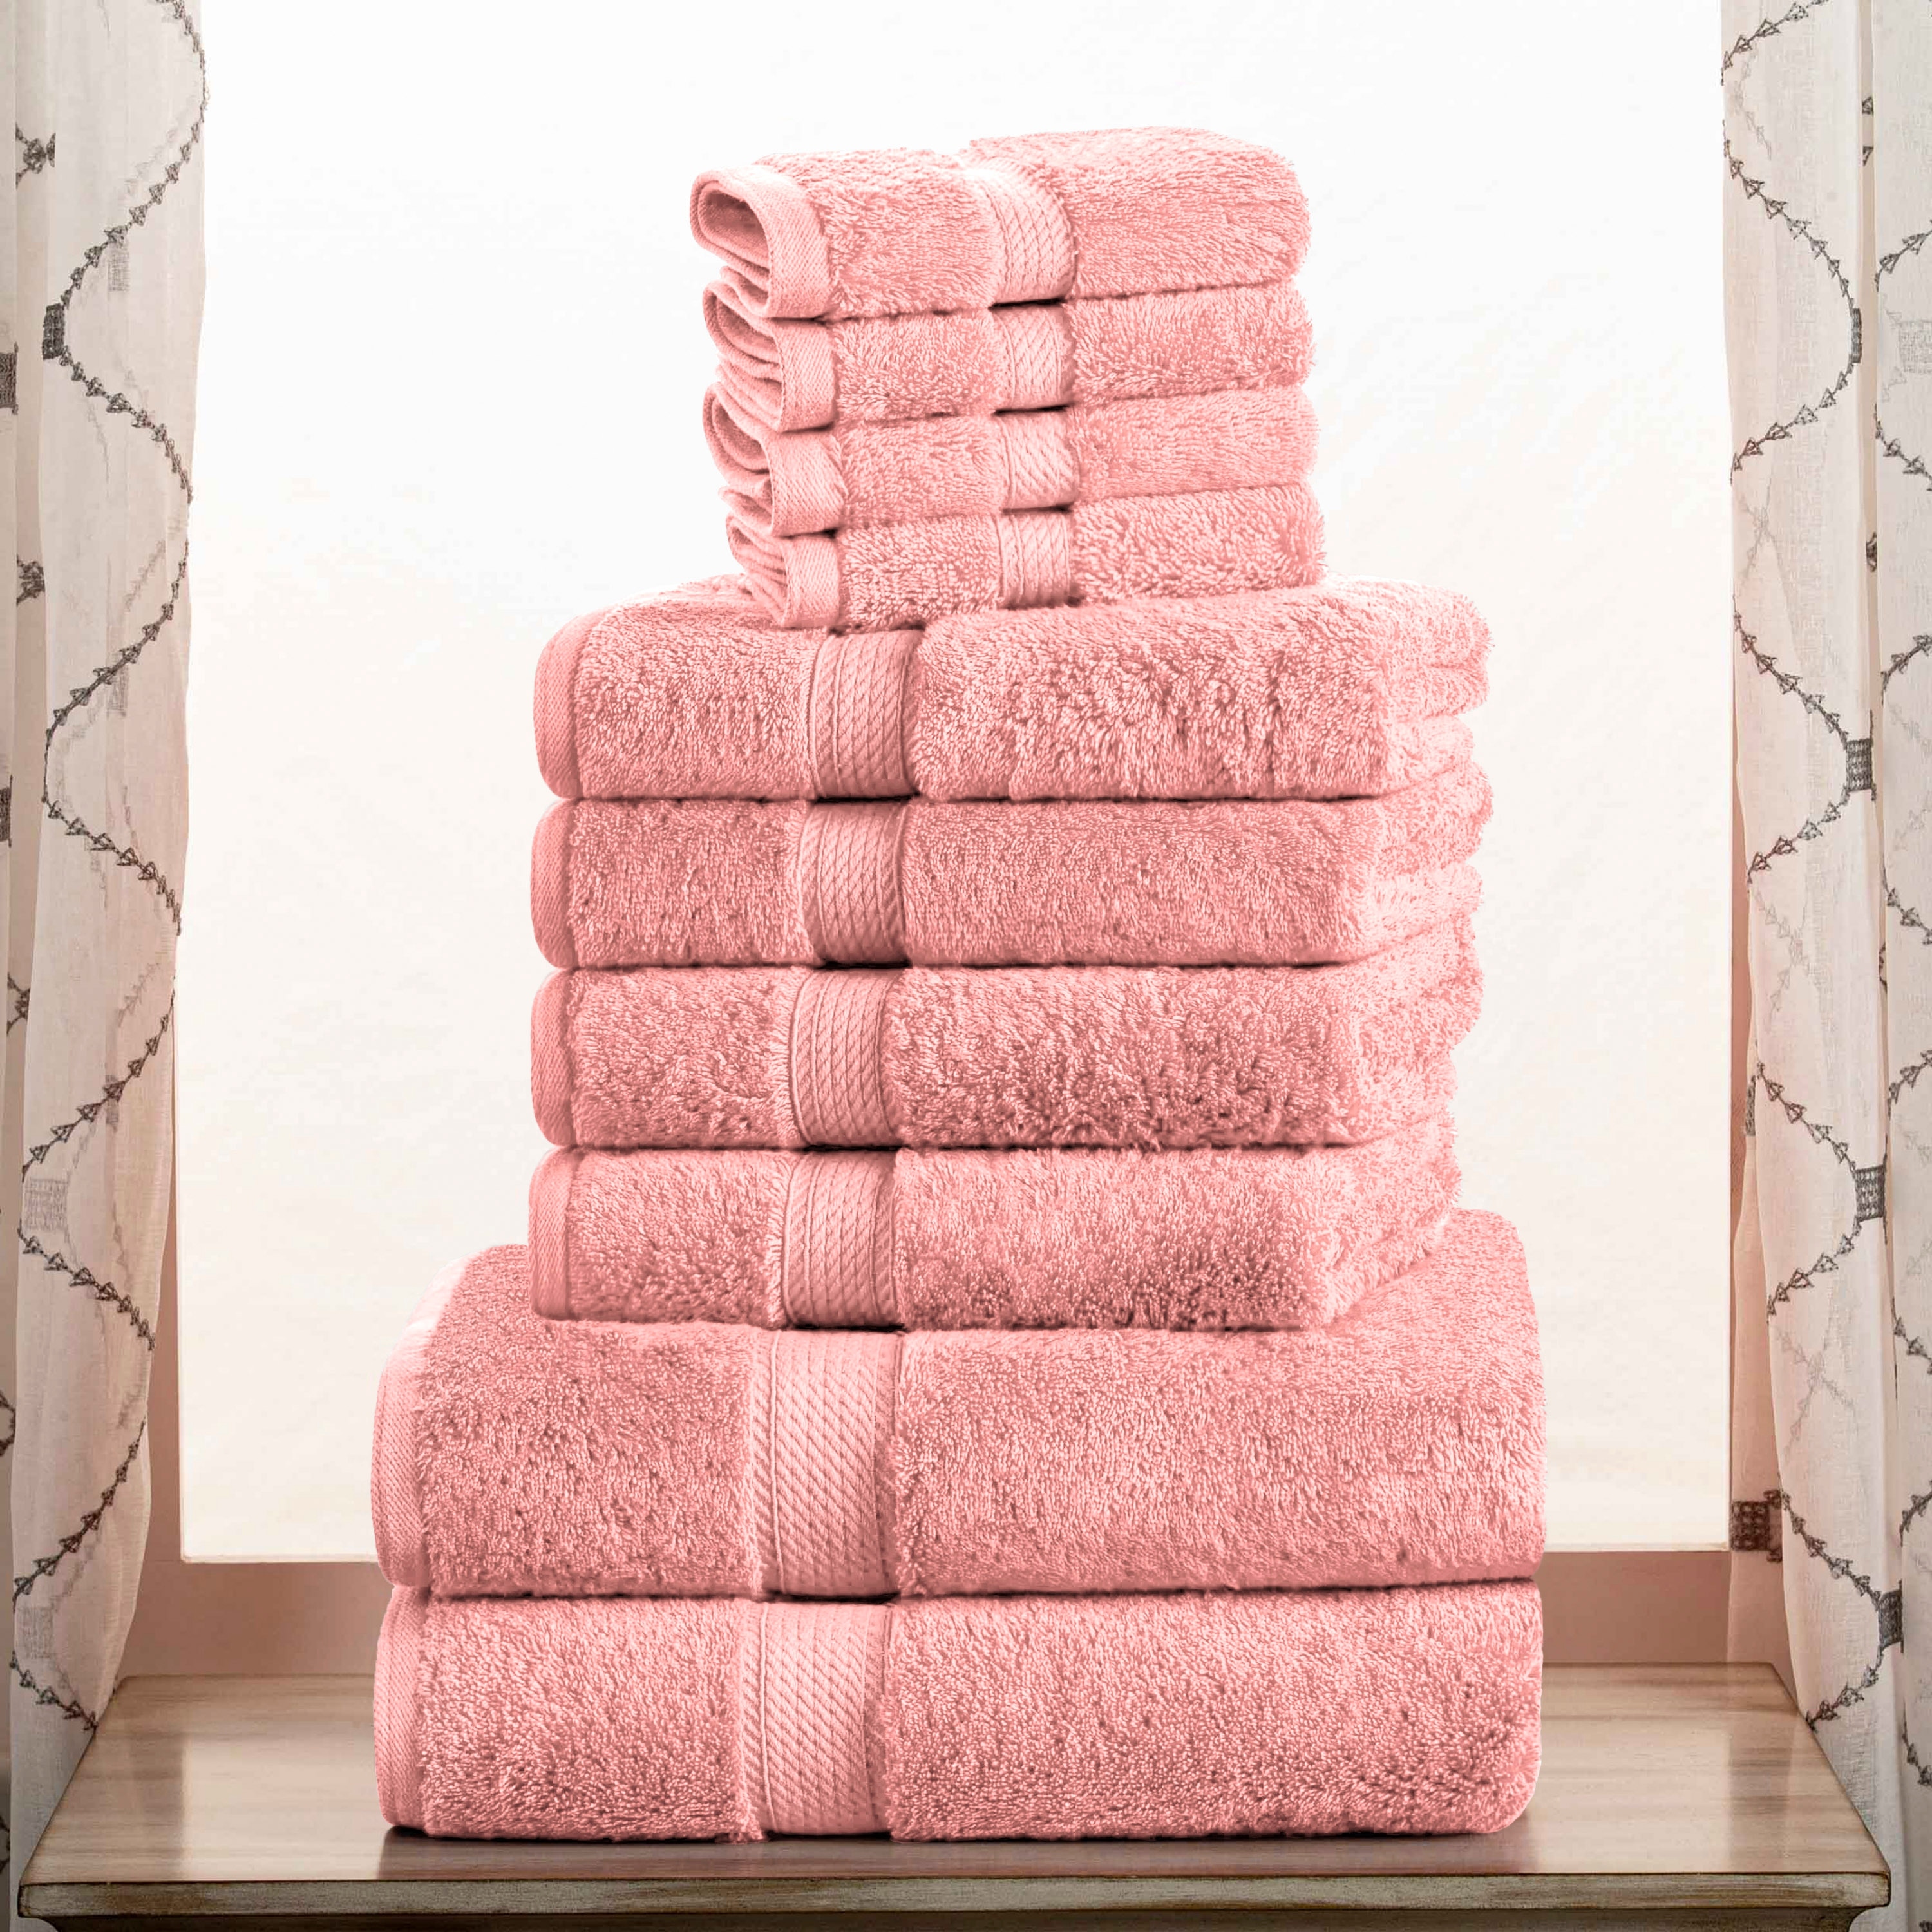 https://ak1.ostkcdn.com/images/products/is/images/direct/e615a678e027f559bedddf2b485cfb5f9aaa4bac/Egyptian-Cotton-Heavyweight-Solid-Plush-Towel-Set-by-Superior.jpg